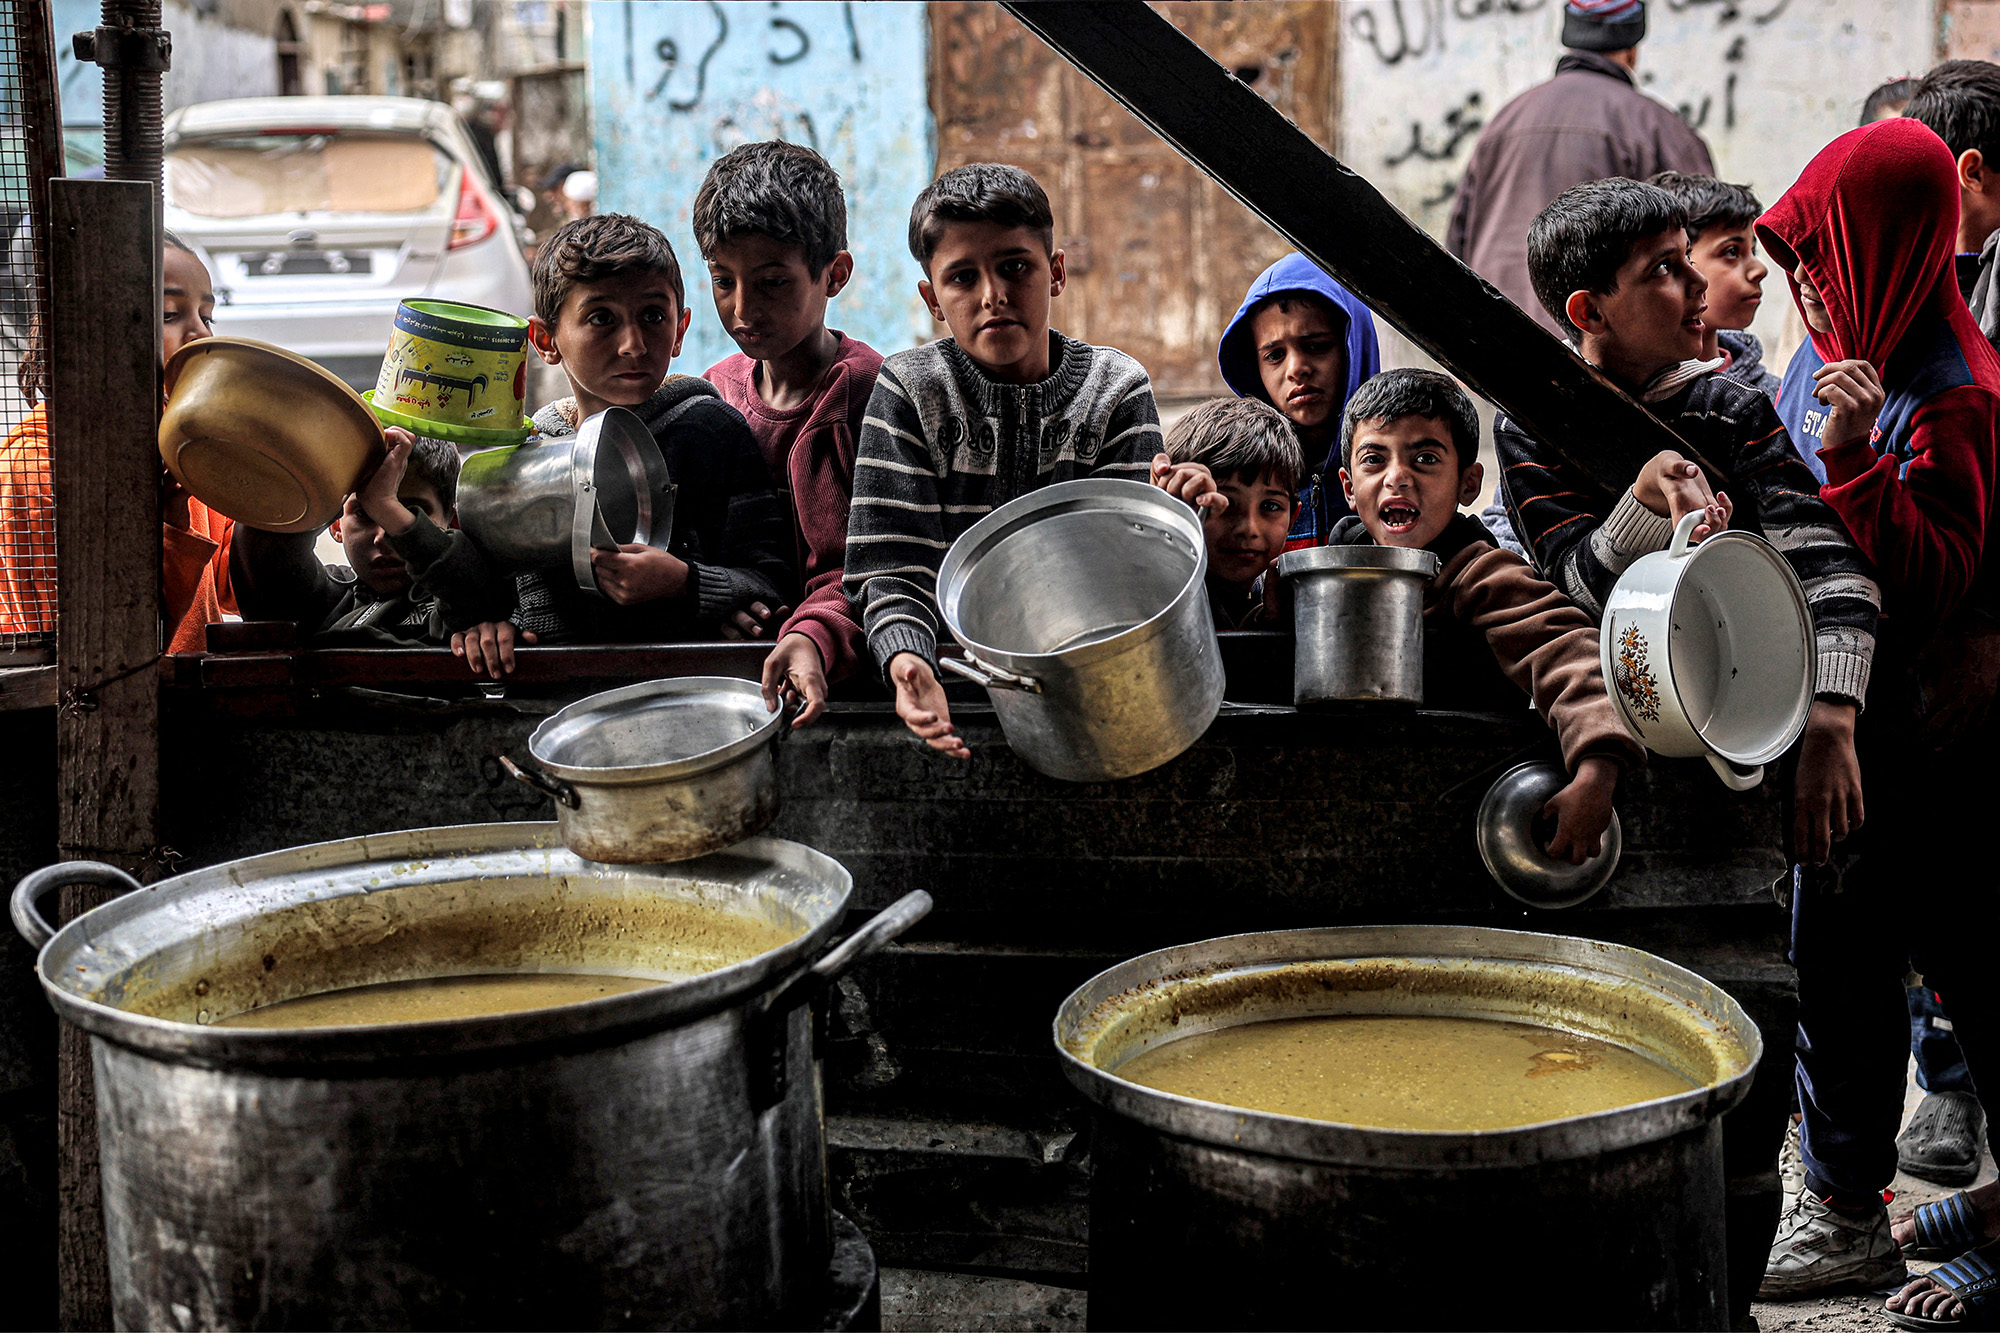 Boys wait while holding empty pots with other displaced Palestinians queueing for meals provided by a charity organisation in Rafah, Gaza, on March 16.